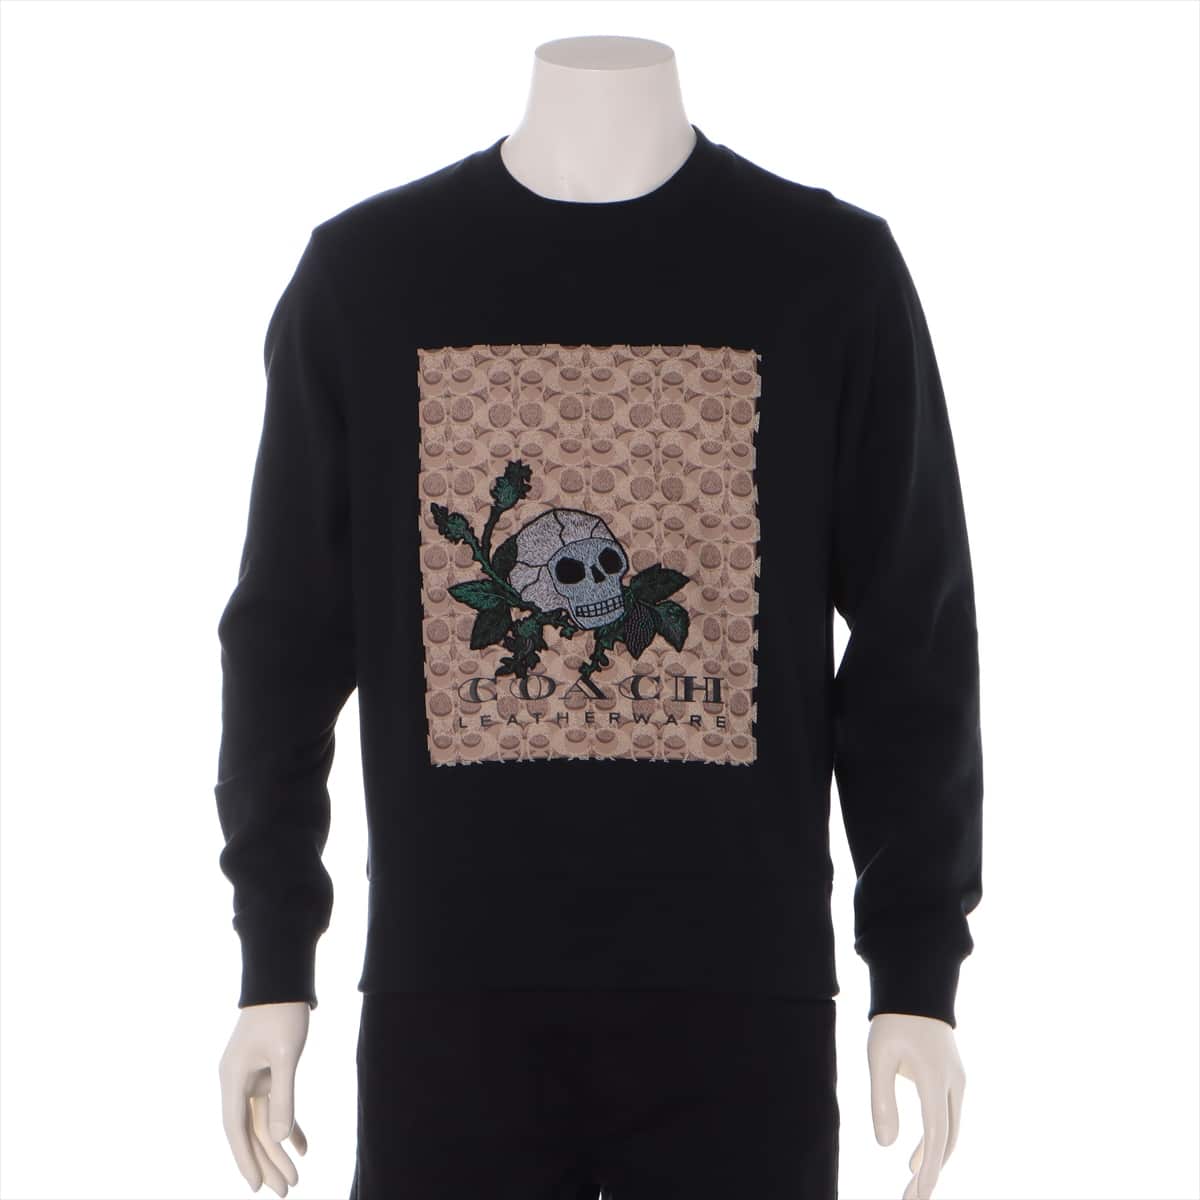 COACH Cotton Basic knitted fabric S Unisex Black  skull embroidery